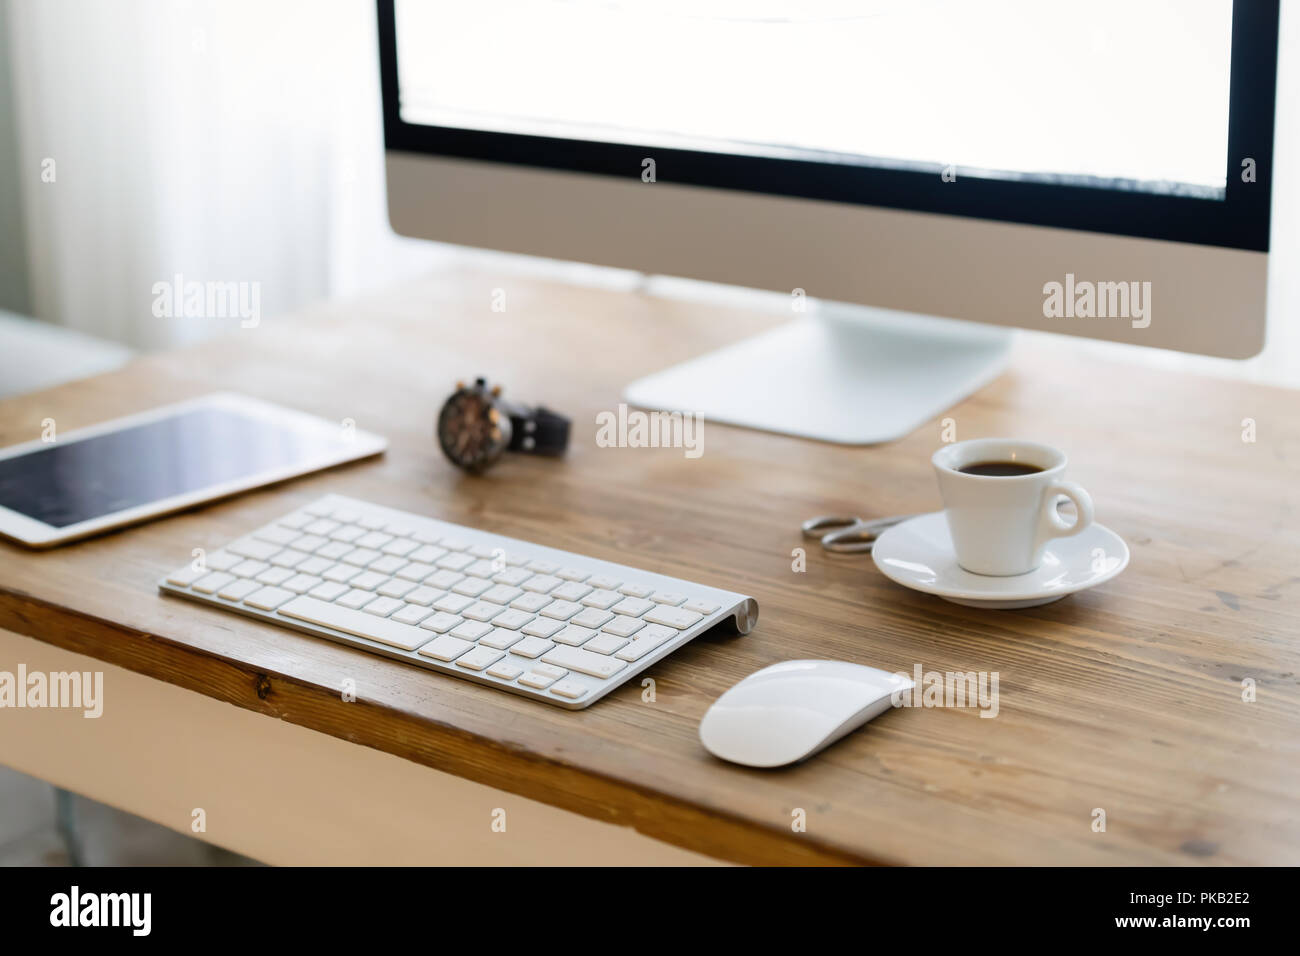 Picture of office desk with tablet computer and other accessories Stock Photo